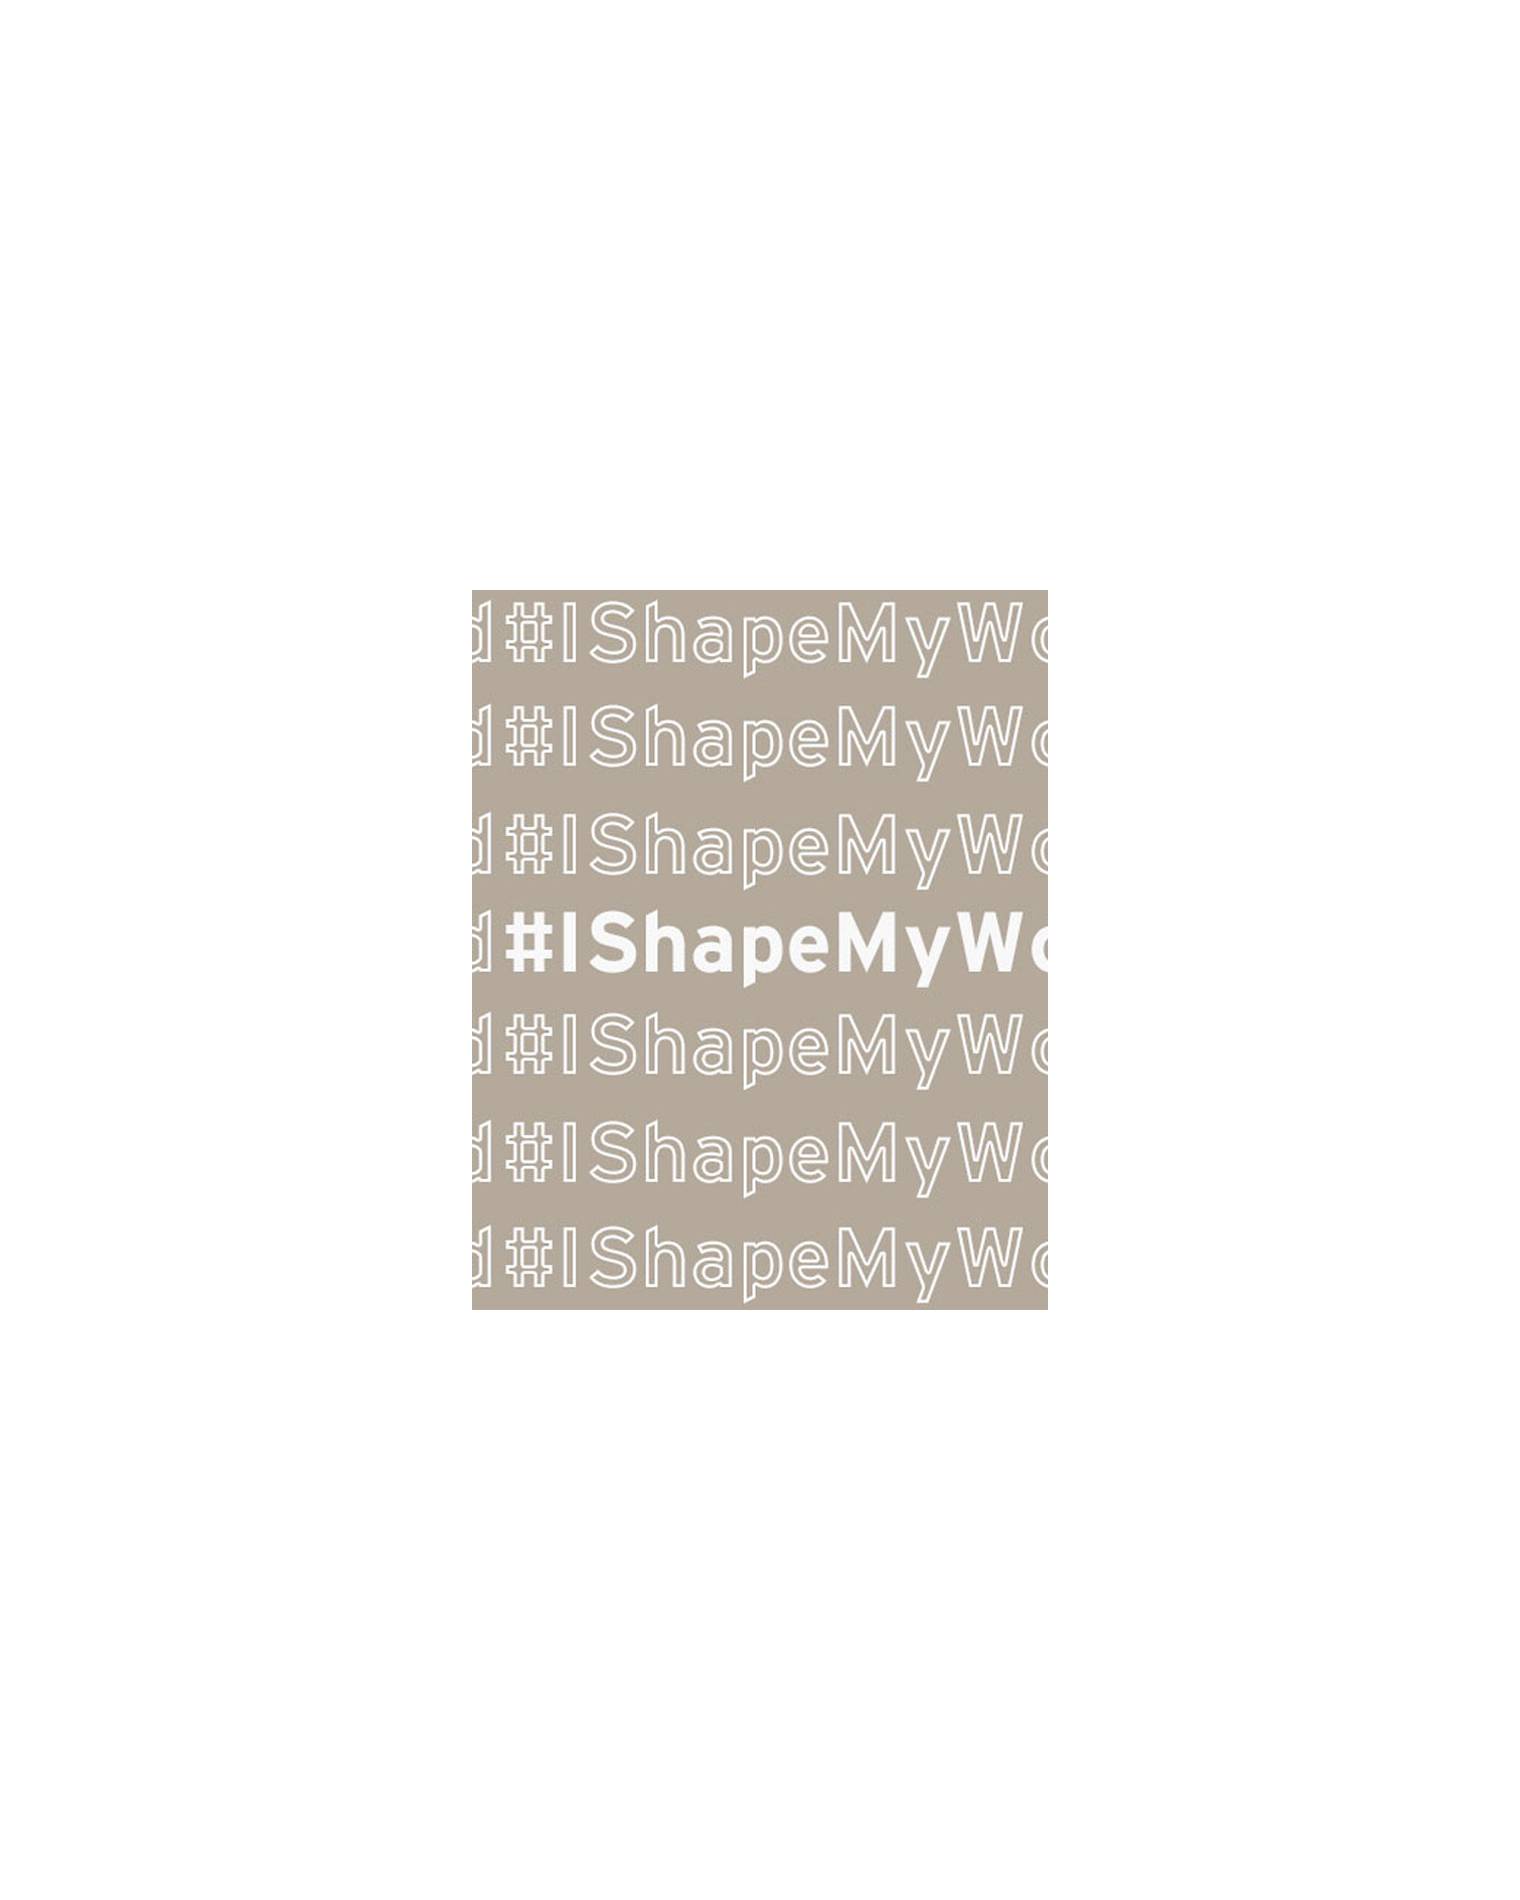 I shape my world header with a beige background and white texgt.